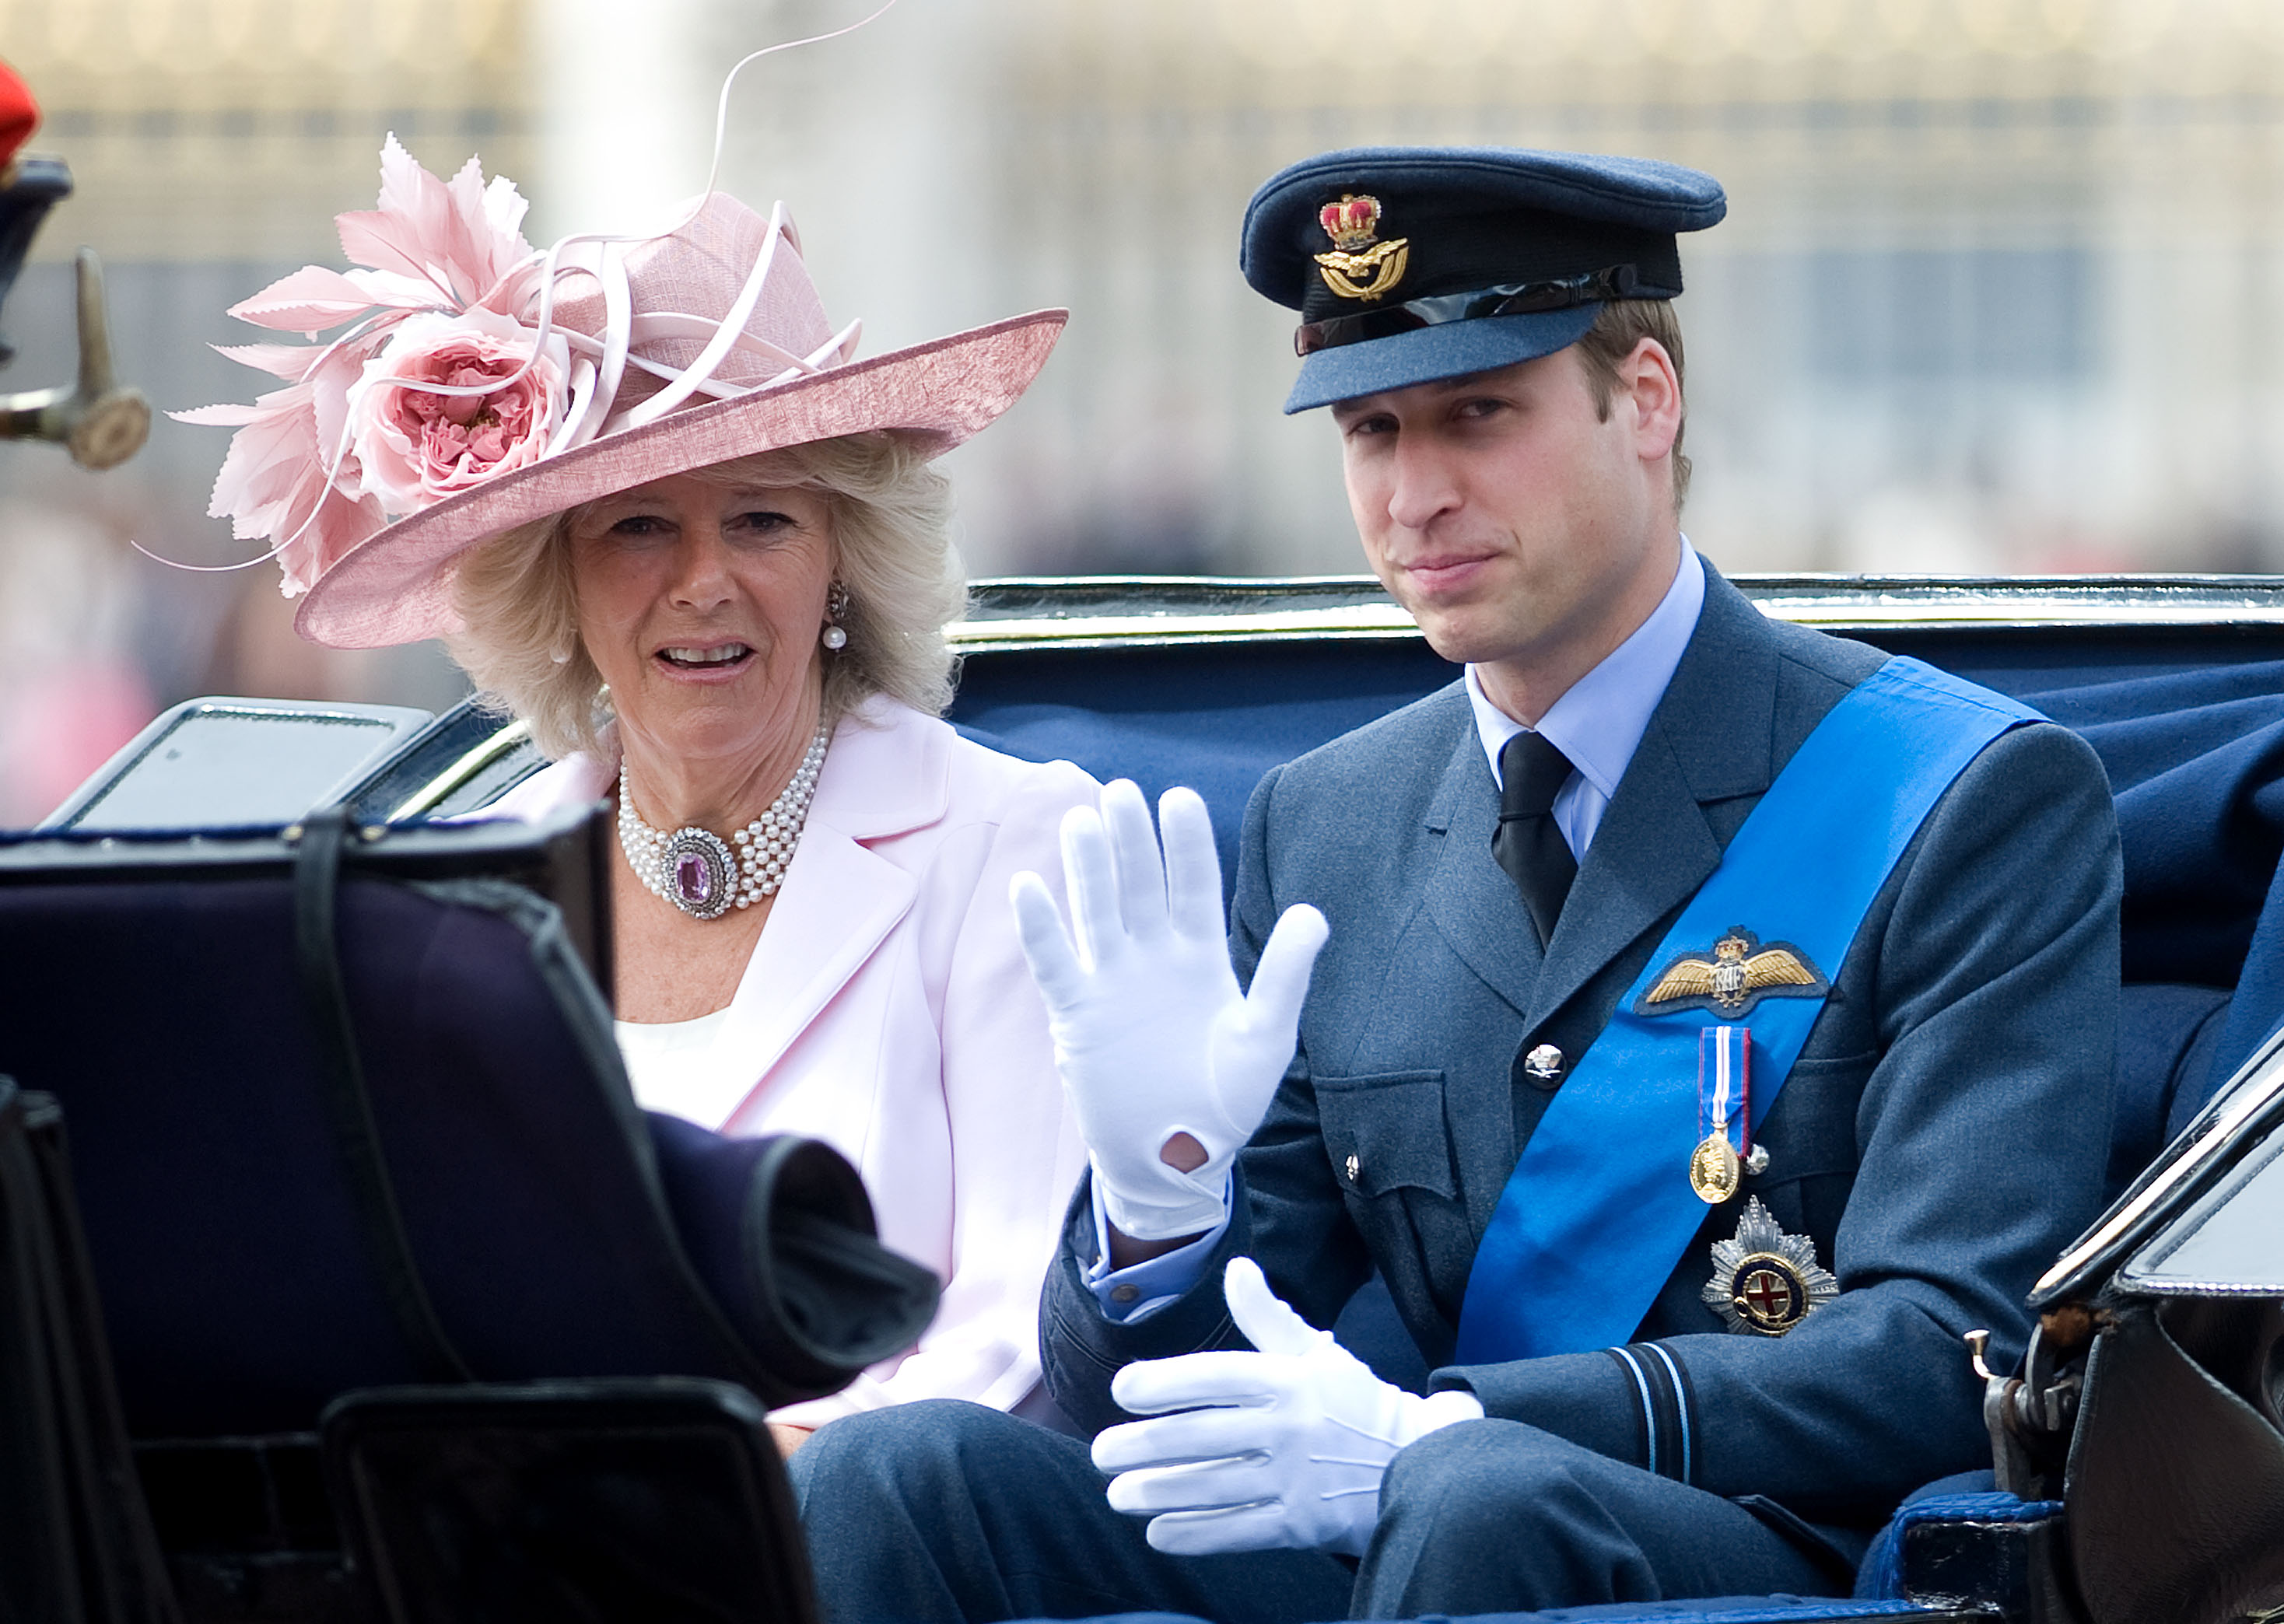 Prince William and Camilla Parker Bowles riding in a carriage during Trooping The Colour